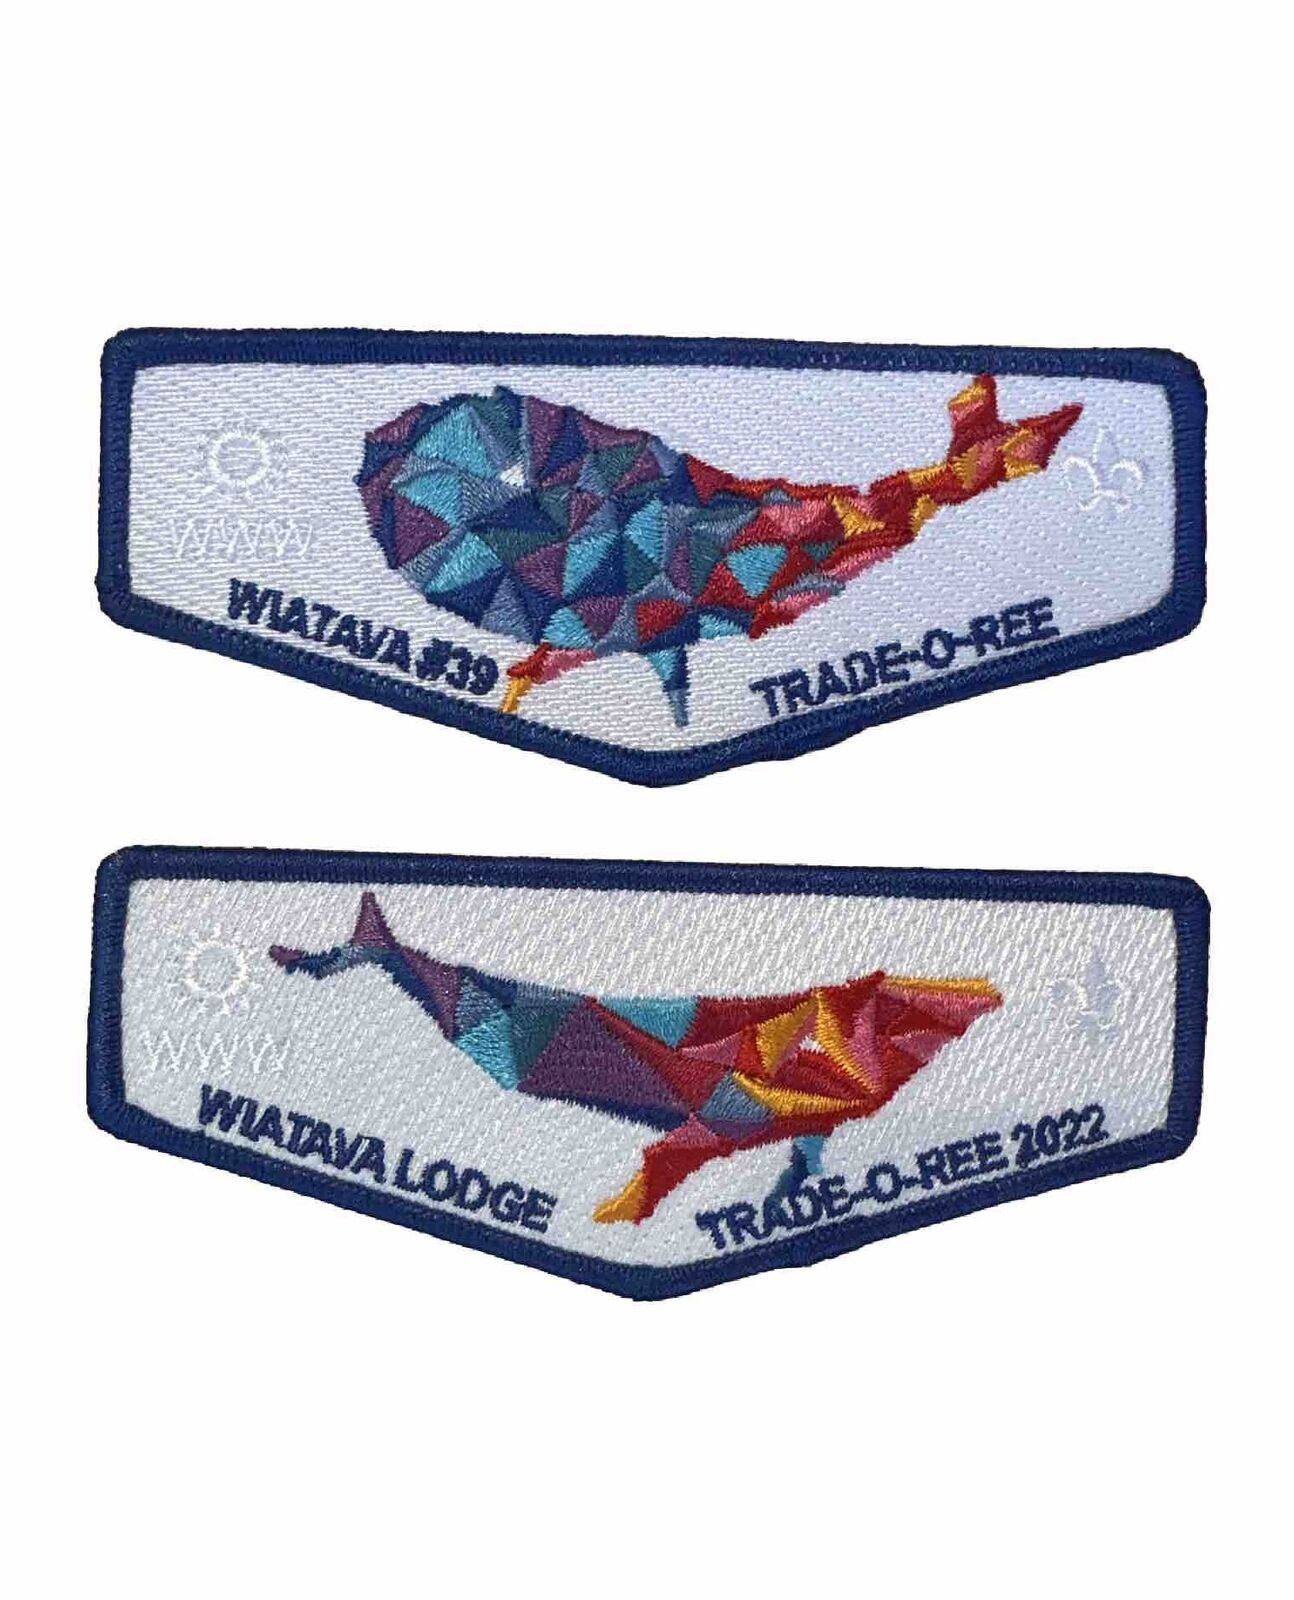 BSA OA PATCHES WIATAVA LODGE TRADE-O-REE 2022 DONOR/ATTENDEE FLAP 100 MADE